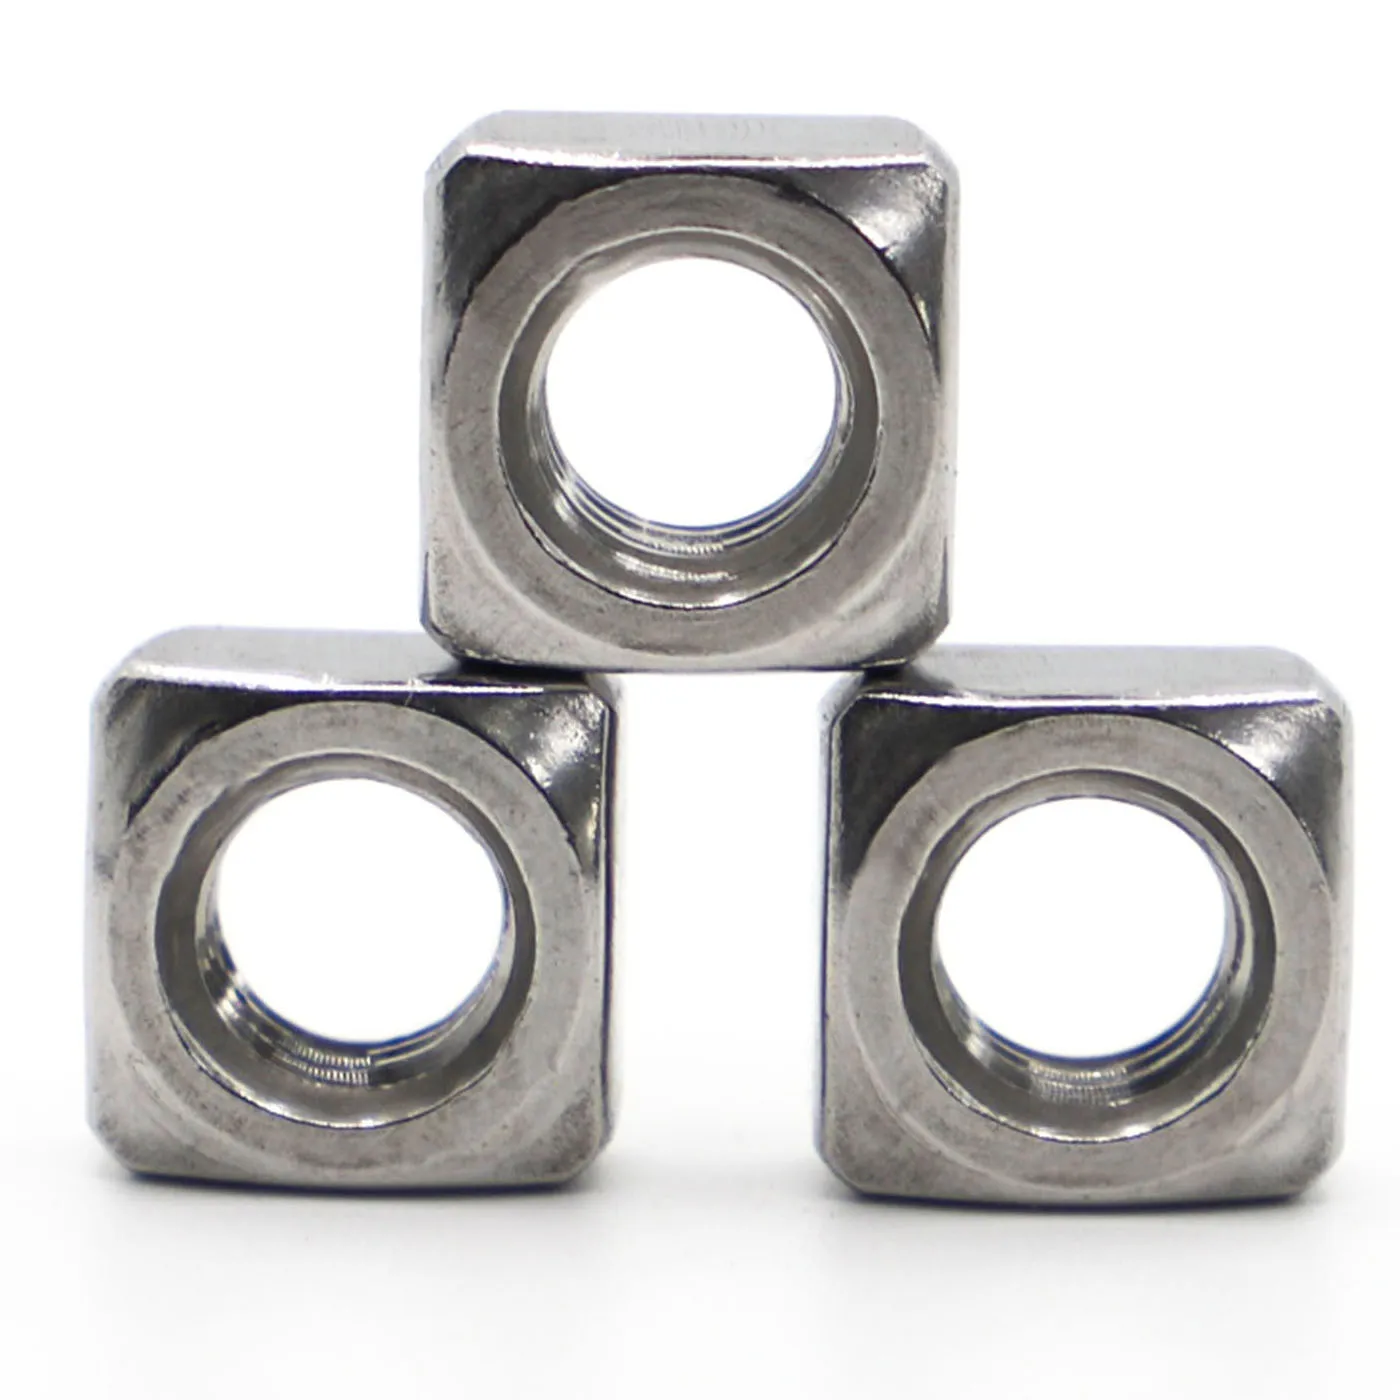 

M3 M4 M5 M6 M8 M10 M12 304 Stainless Steel Square Nuts DIN557